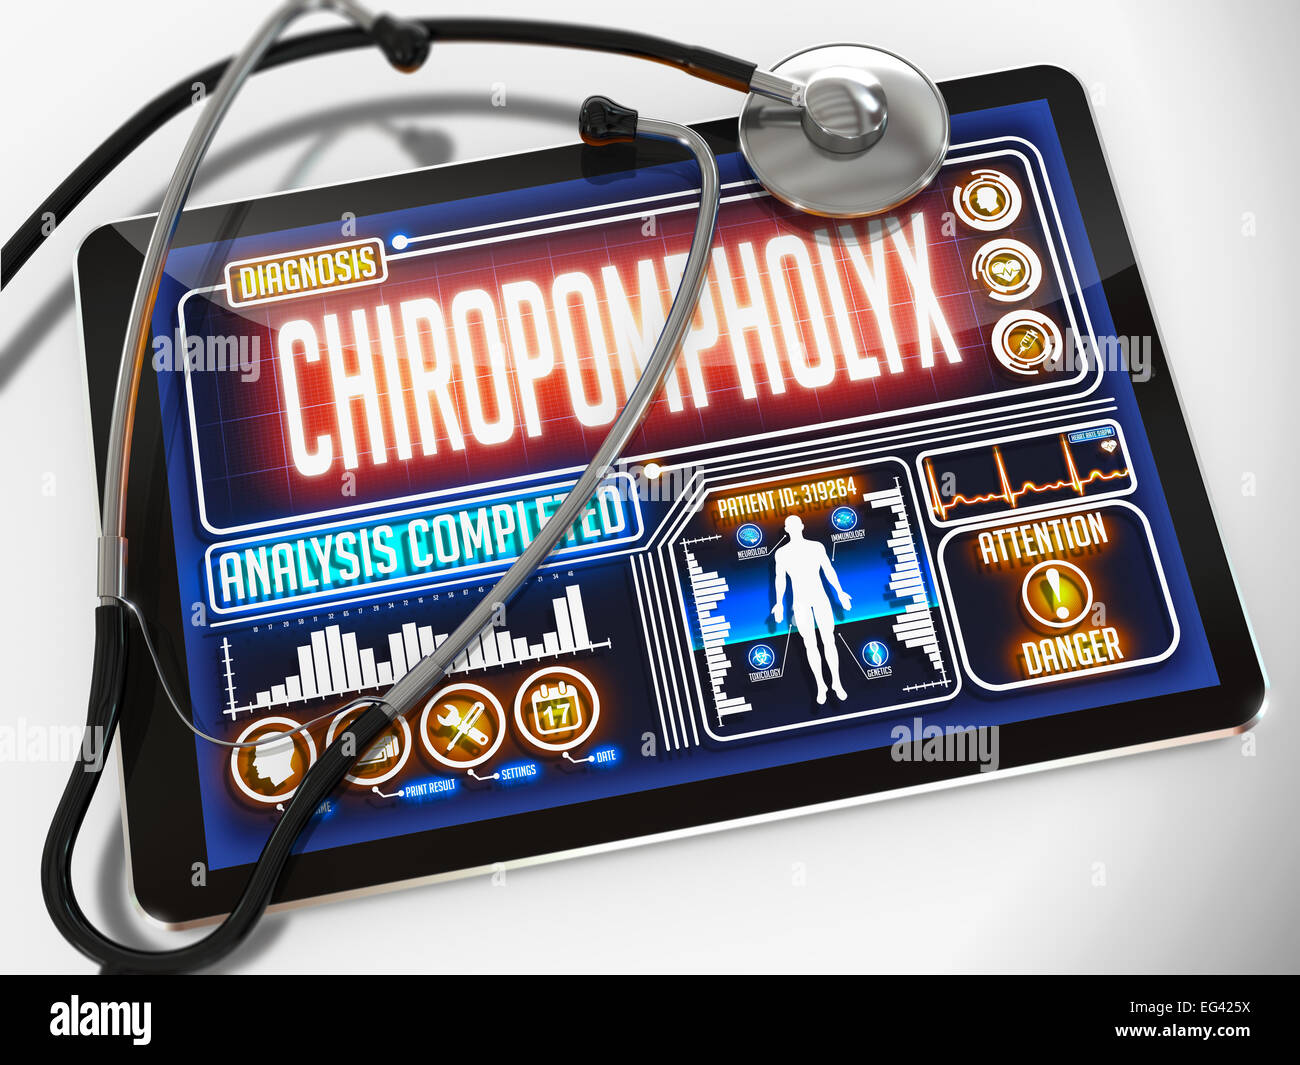 Chiropompholyx on the Display of Medical Tablet. Stock Photo